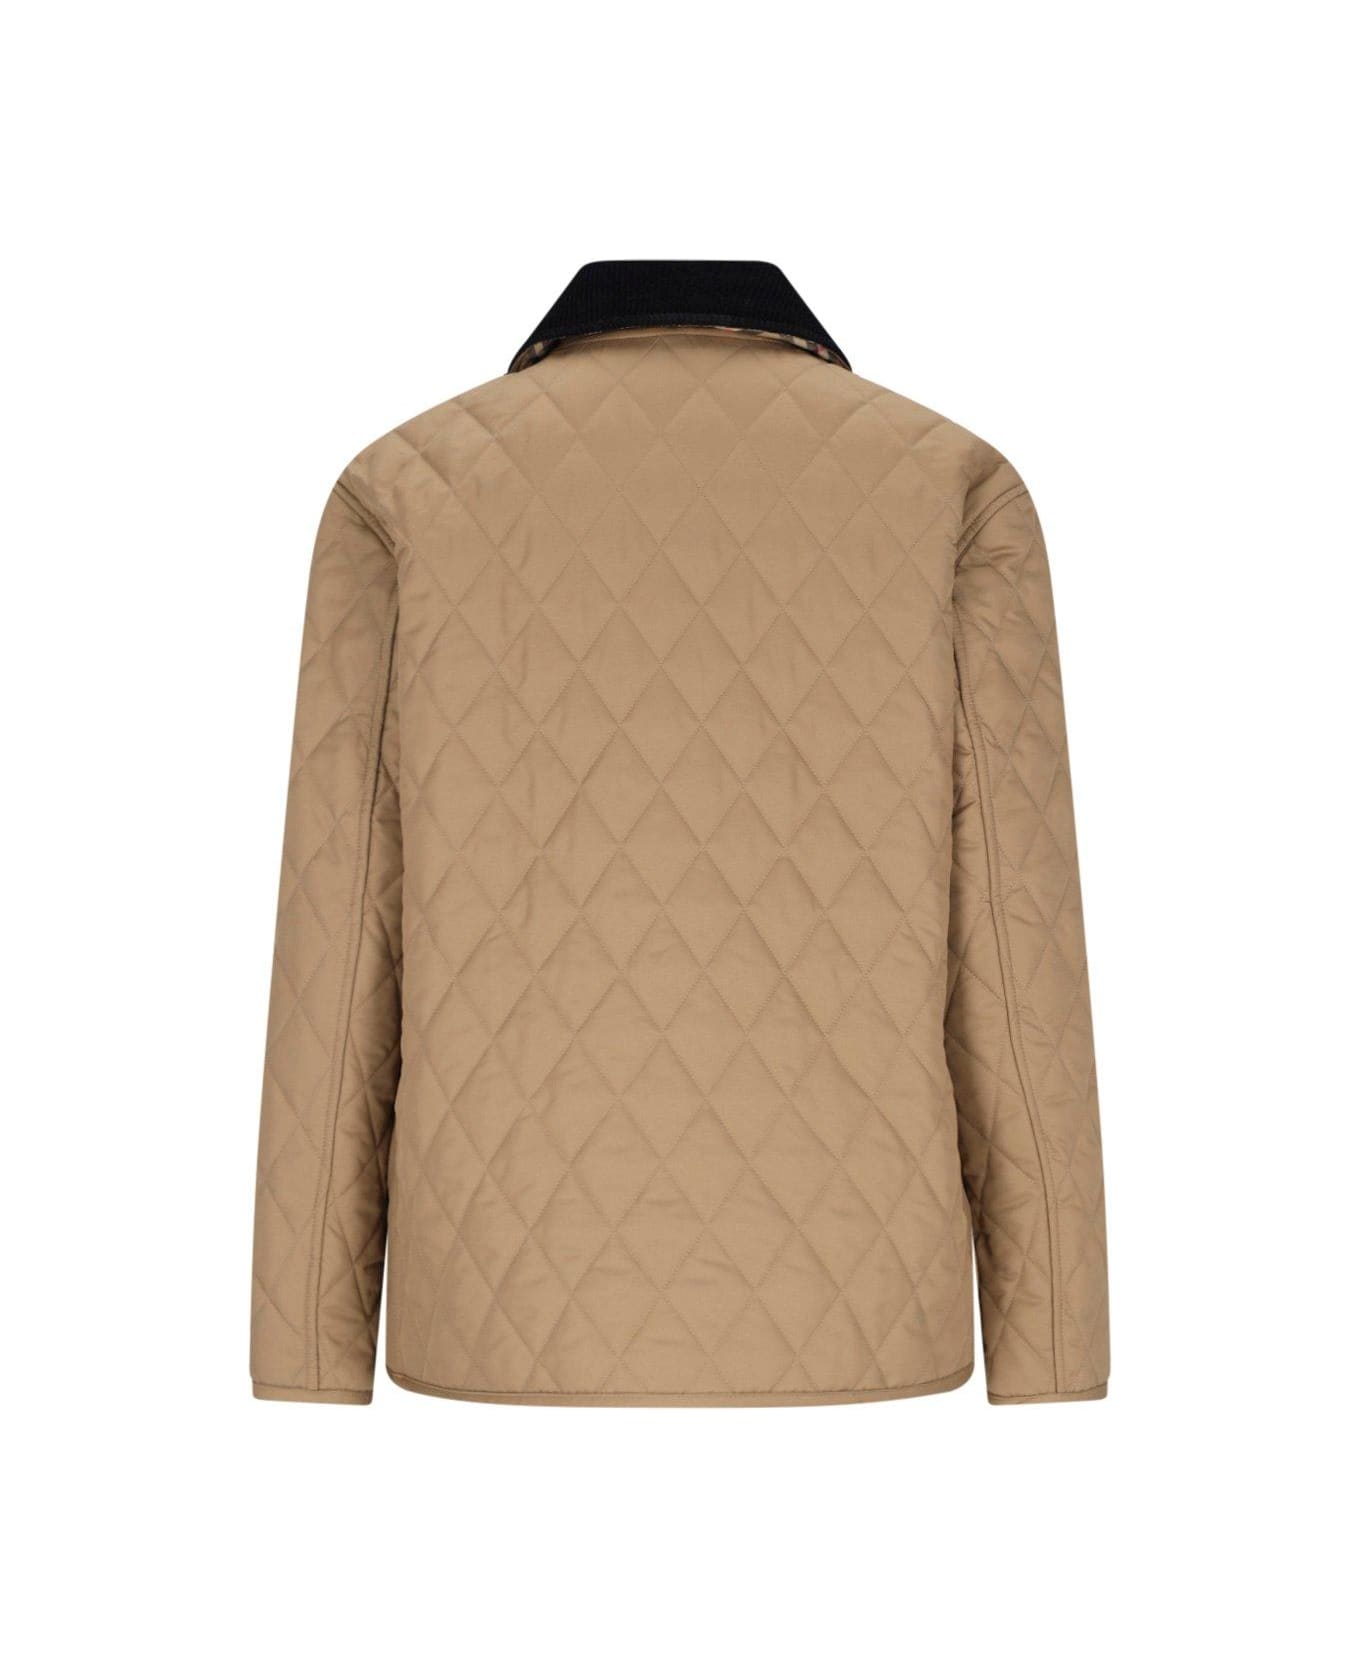 Burberry Long Sleeved Quilted Jacket - Camel